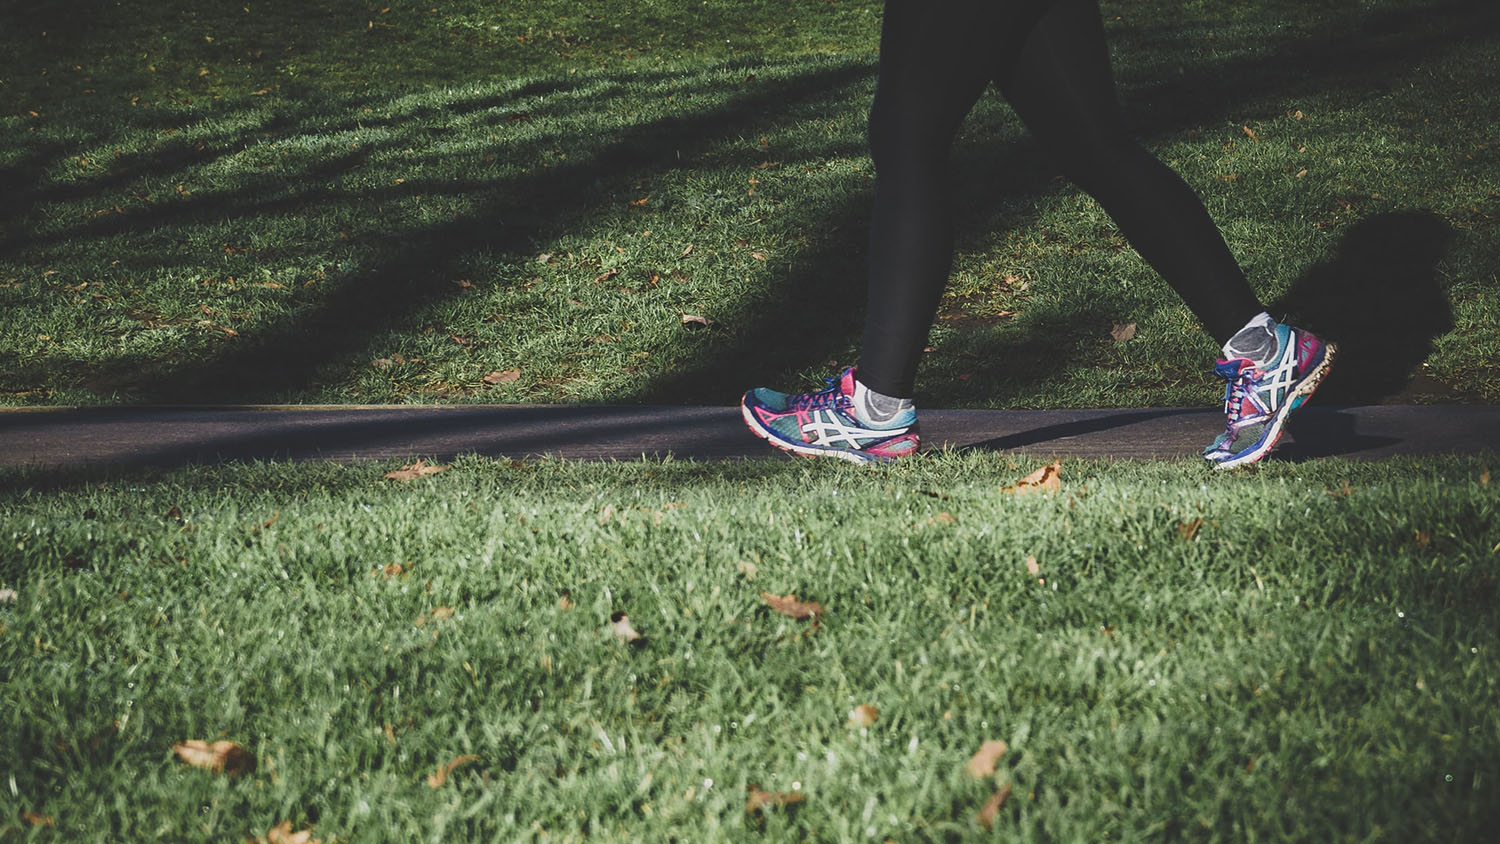 photo shows the legs of someone walking or running on a path in a park